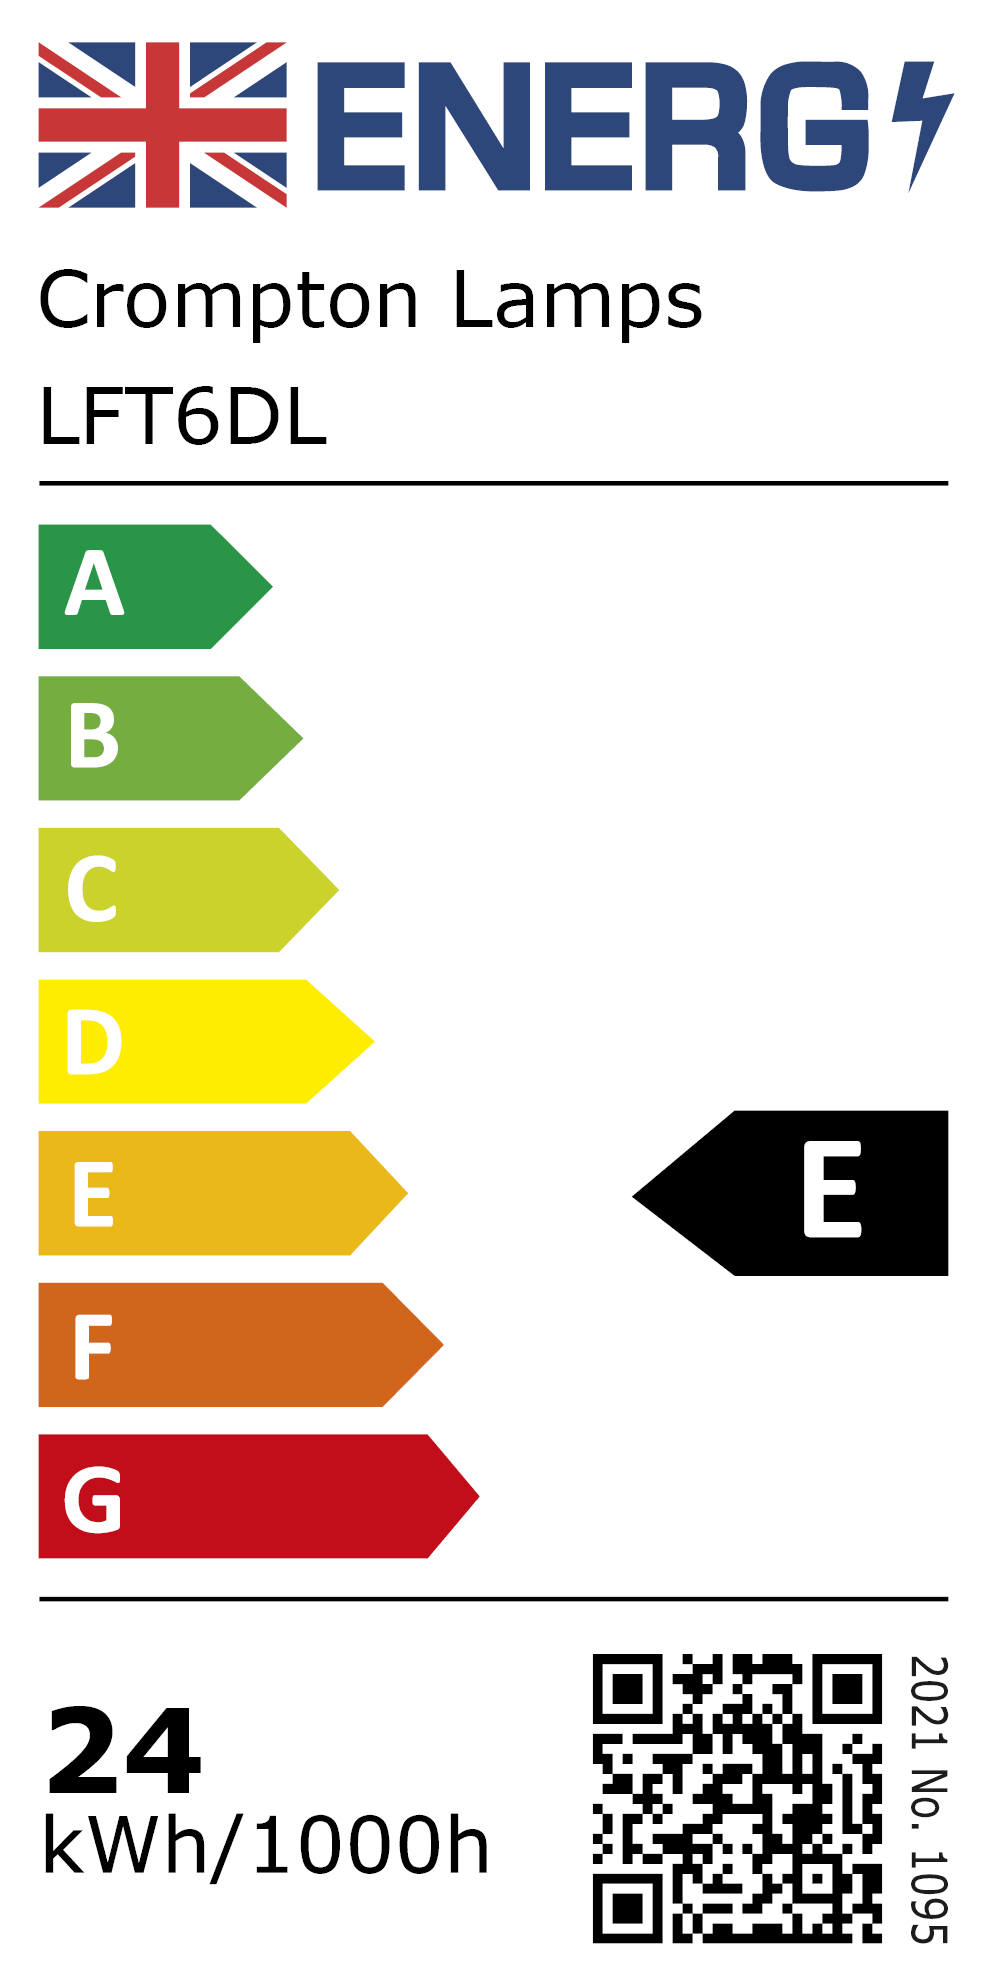 New 2021 Energy Rating Label: Stock Code LFT6DL